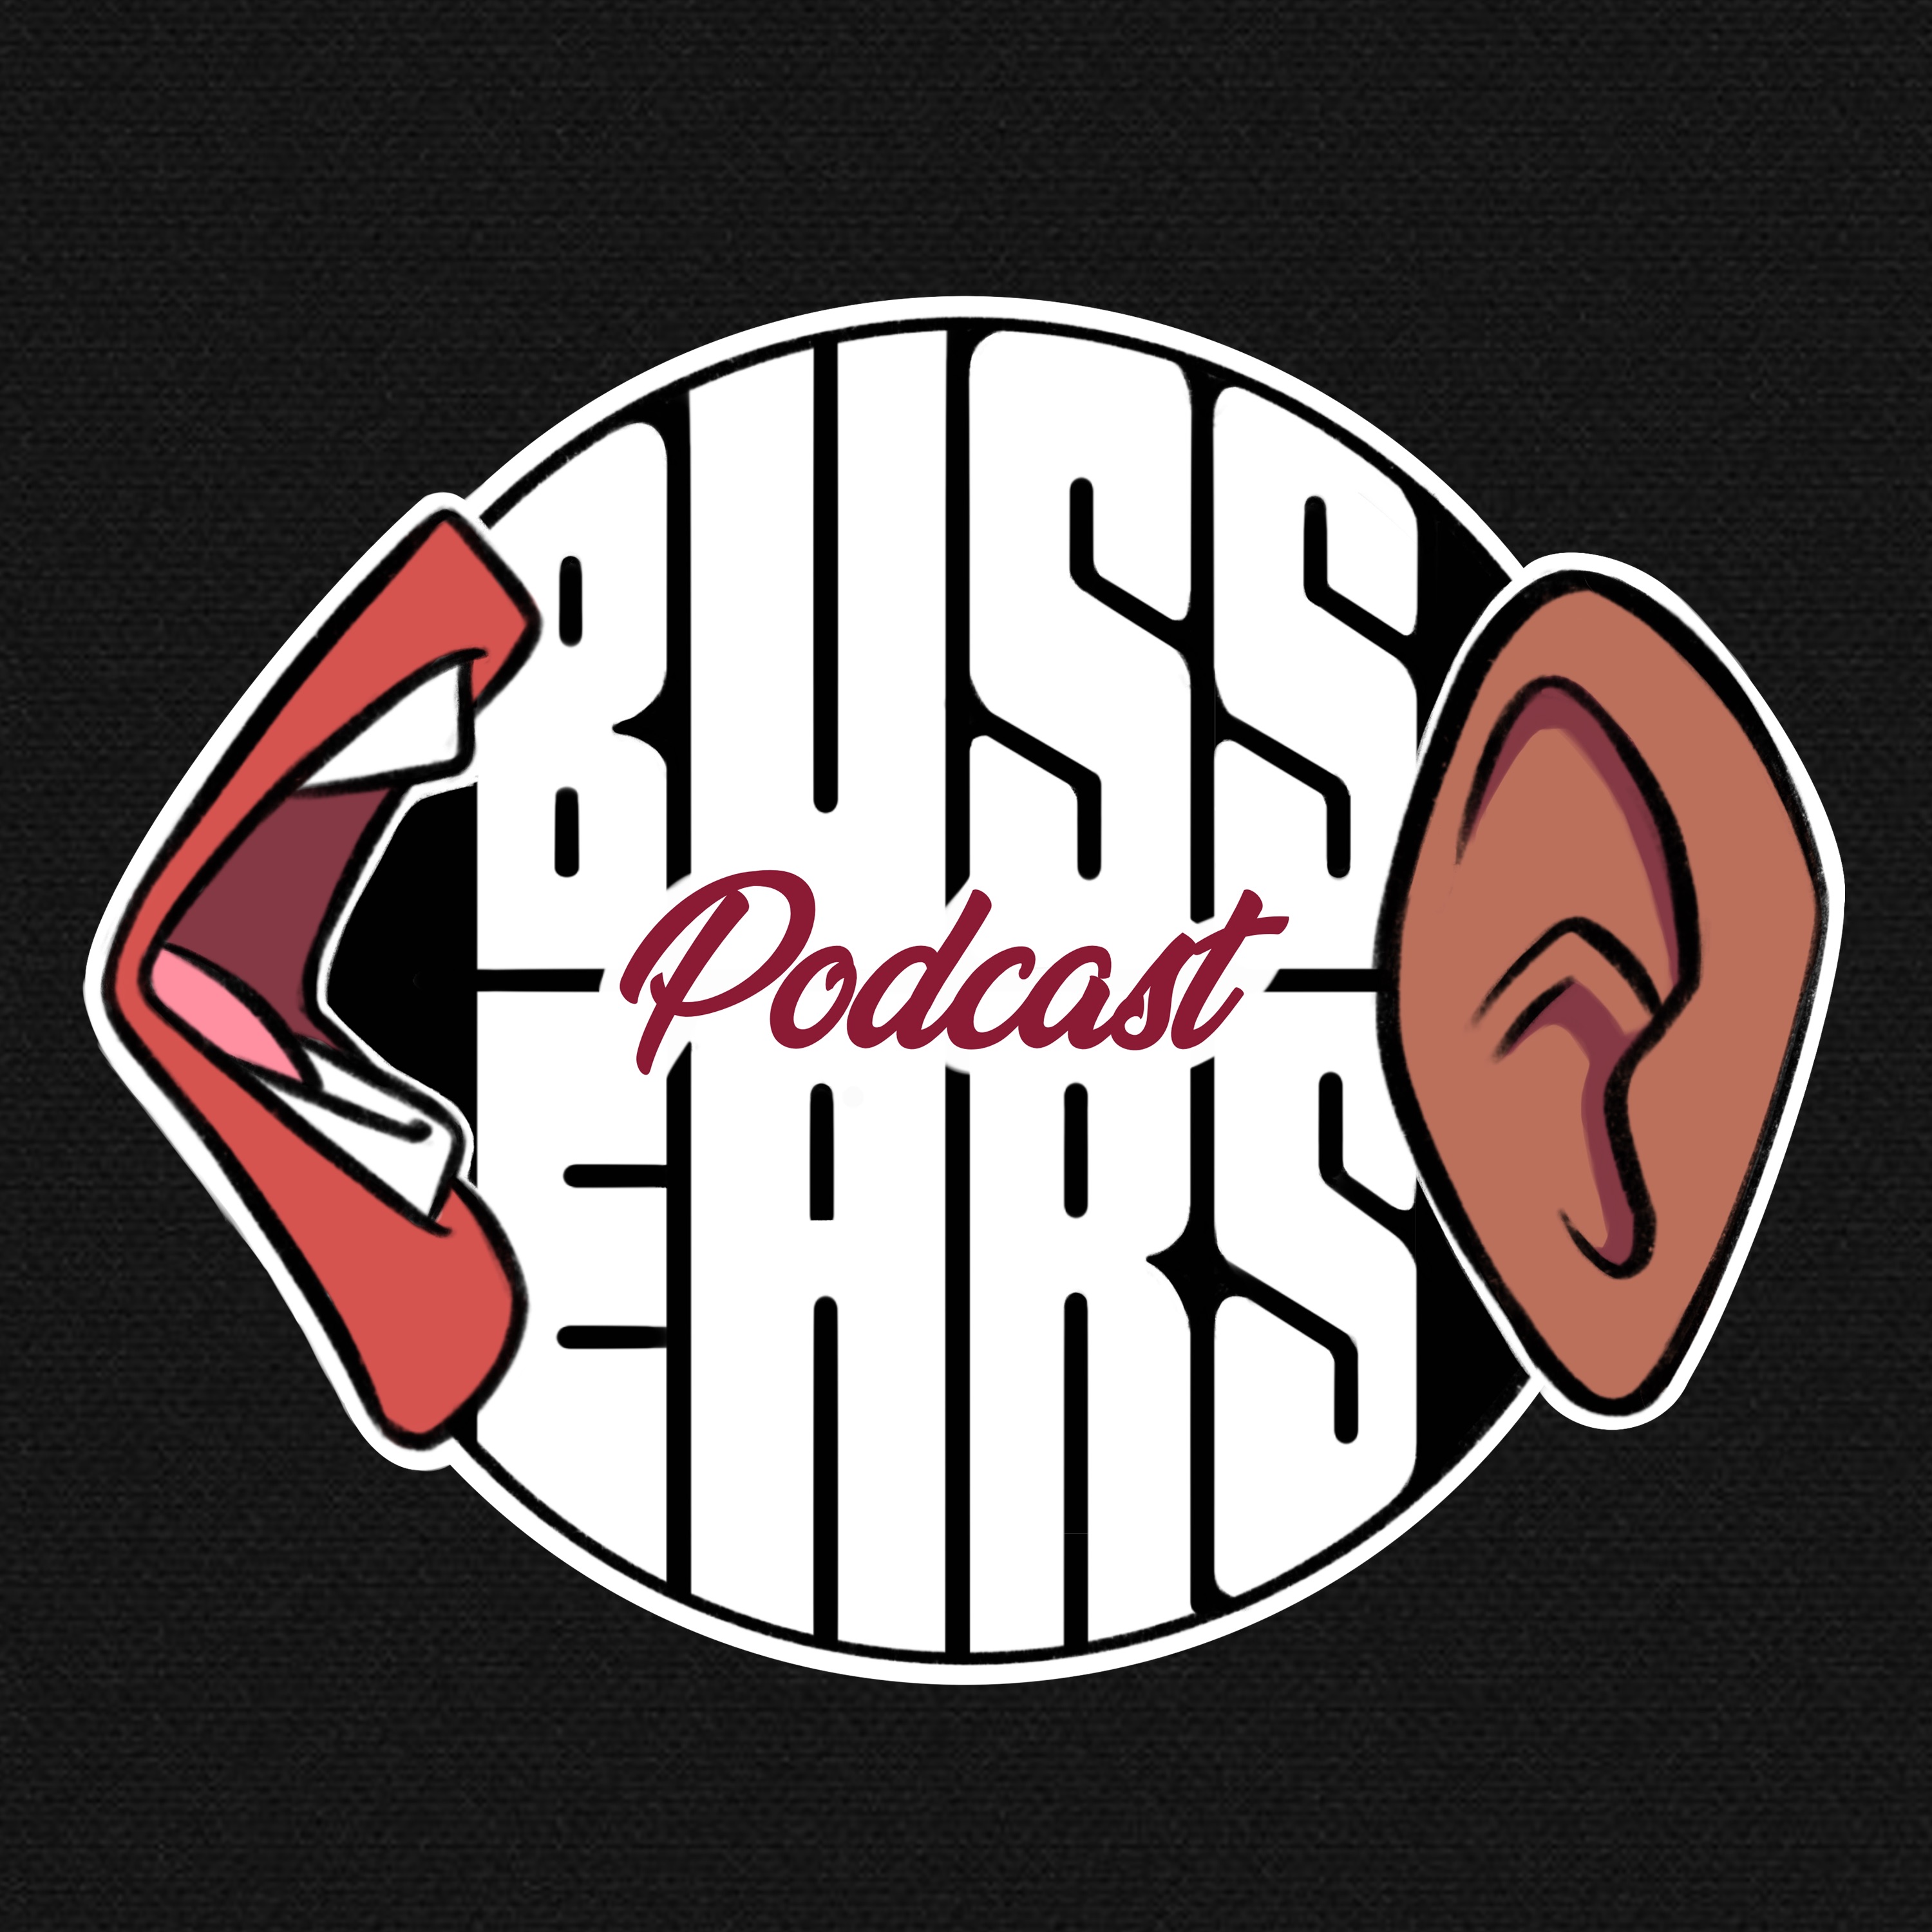 Buss Ears, Ep 3 - Let's talk about using mental illness as an excuse